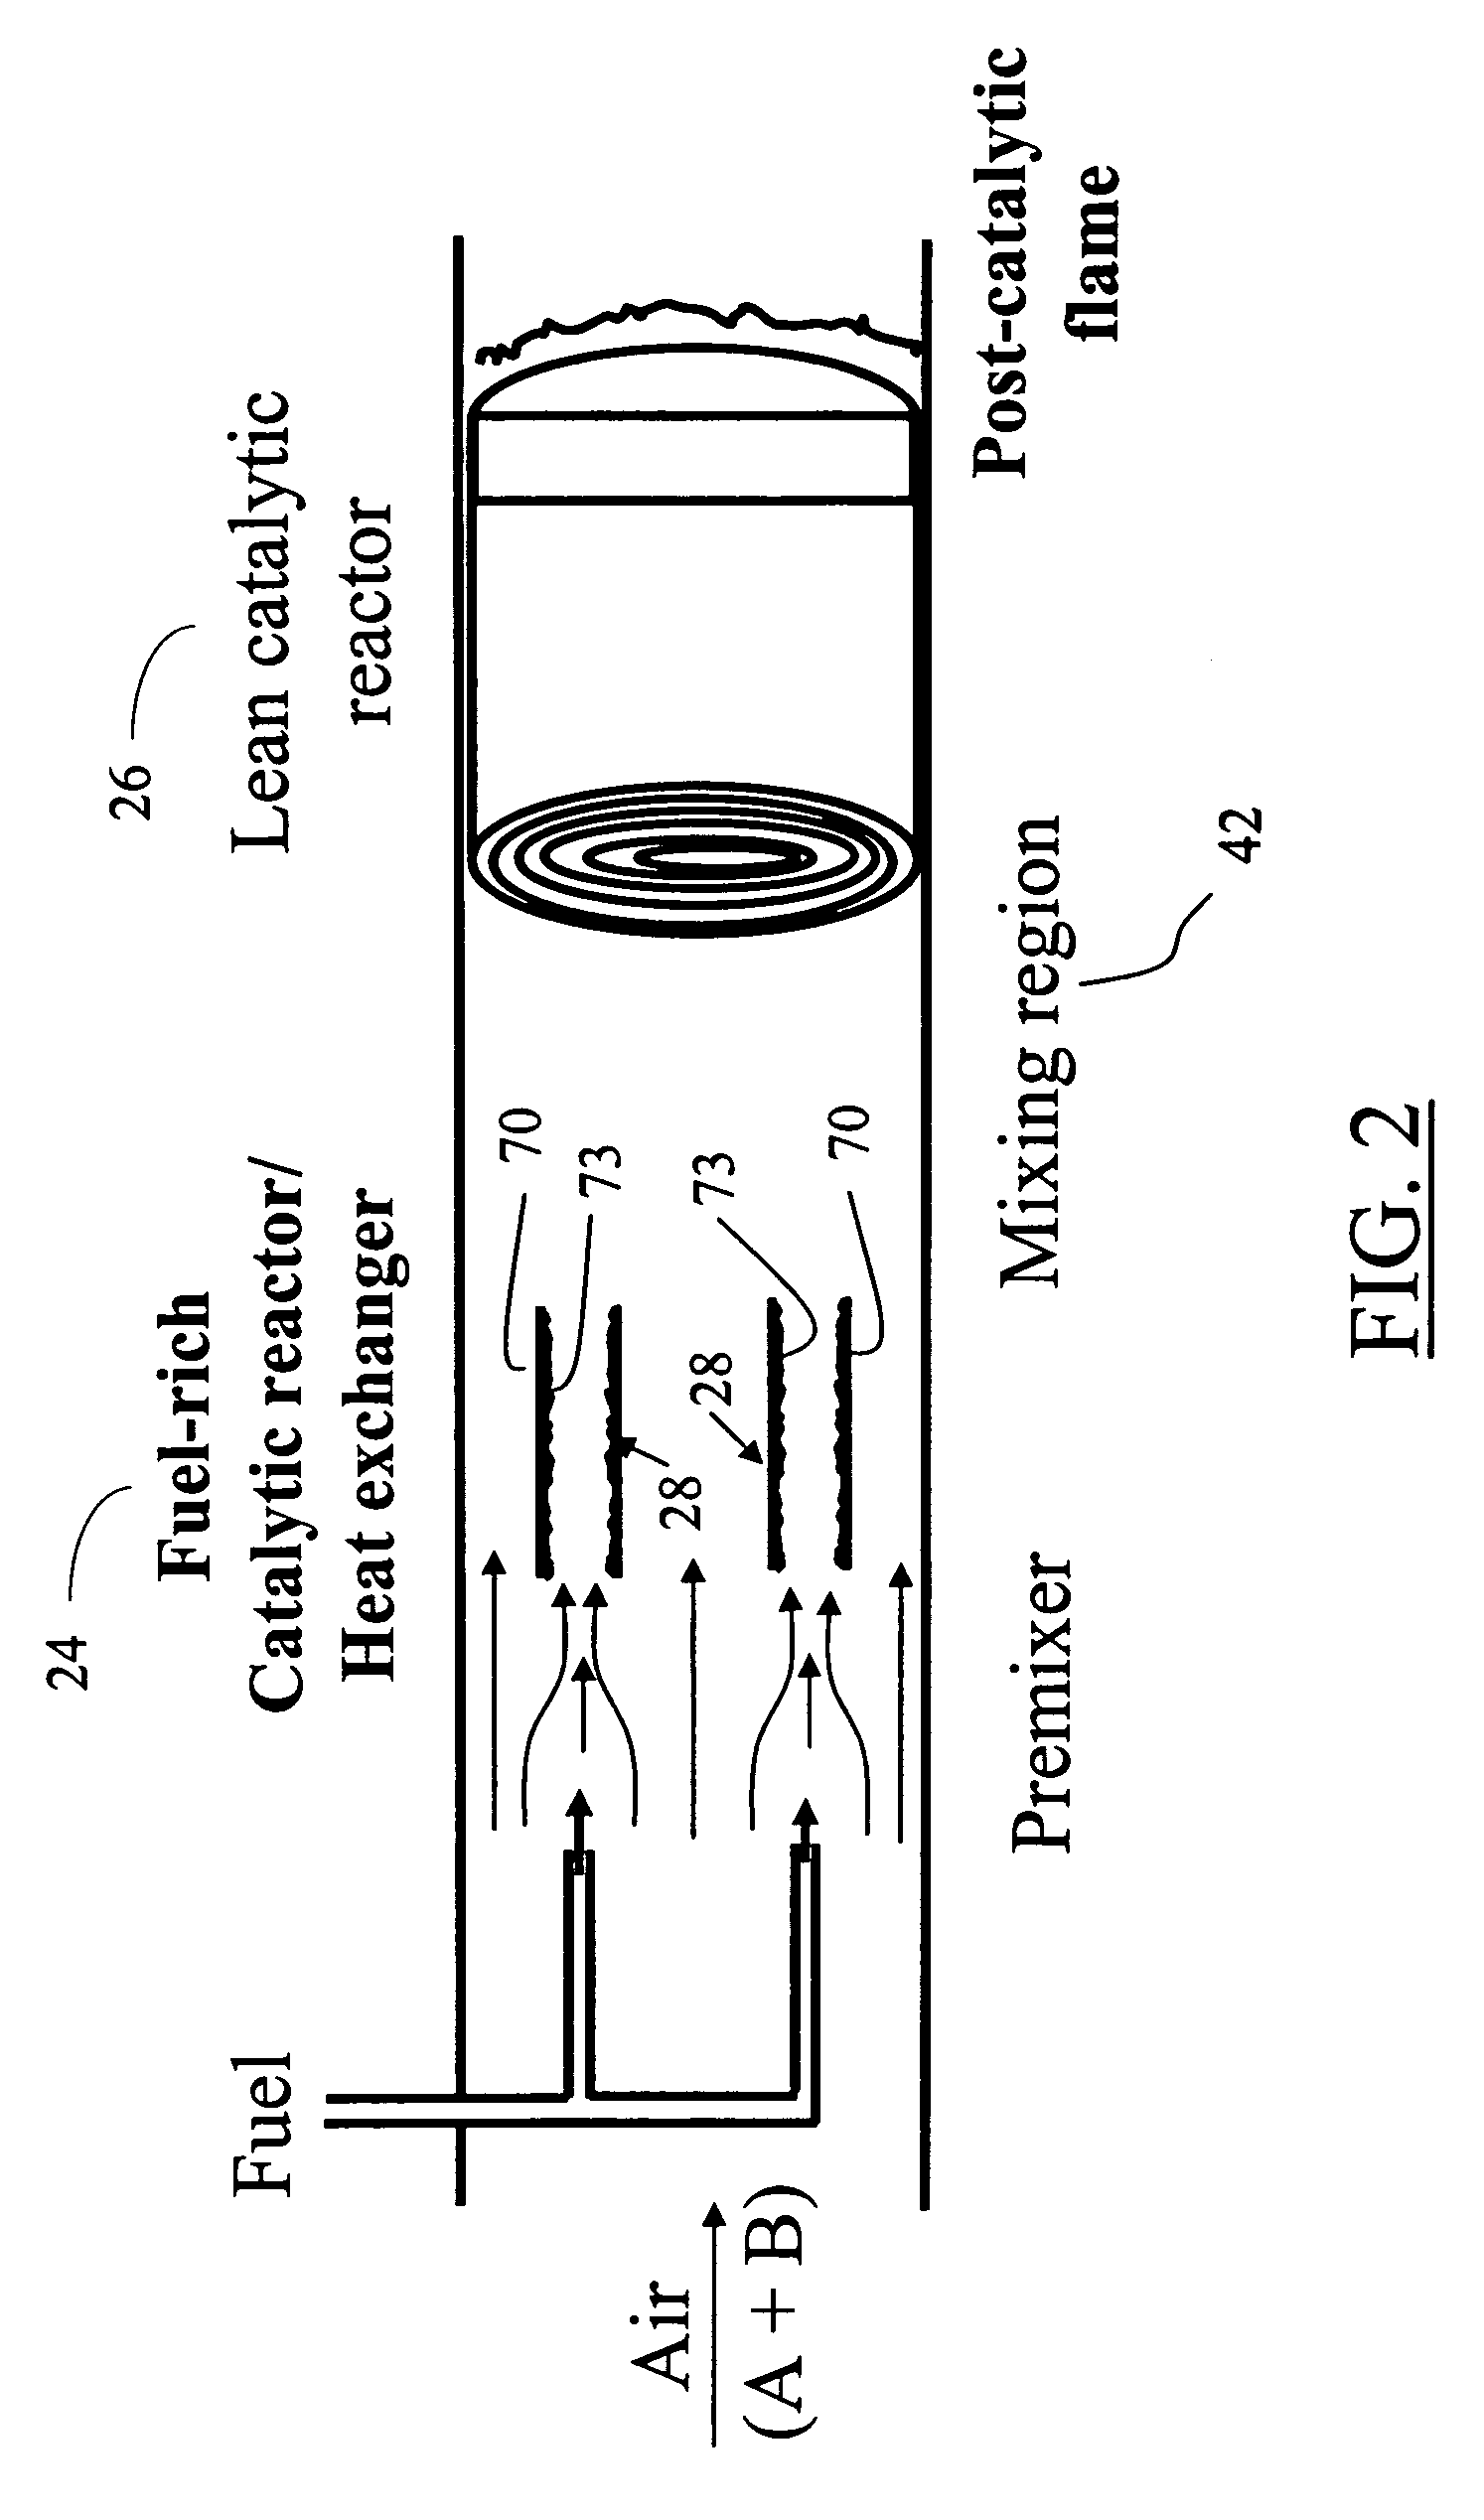 Method and system for rich-lean catalytic combustion